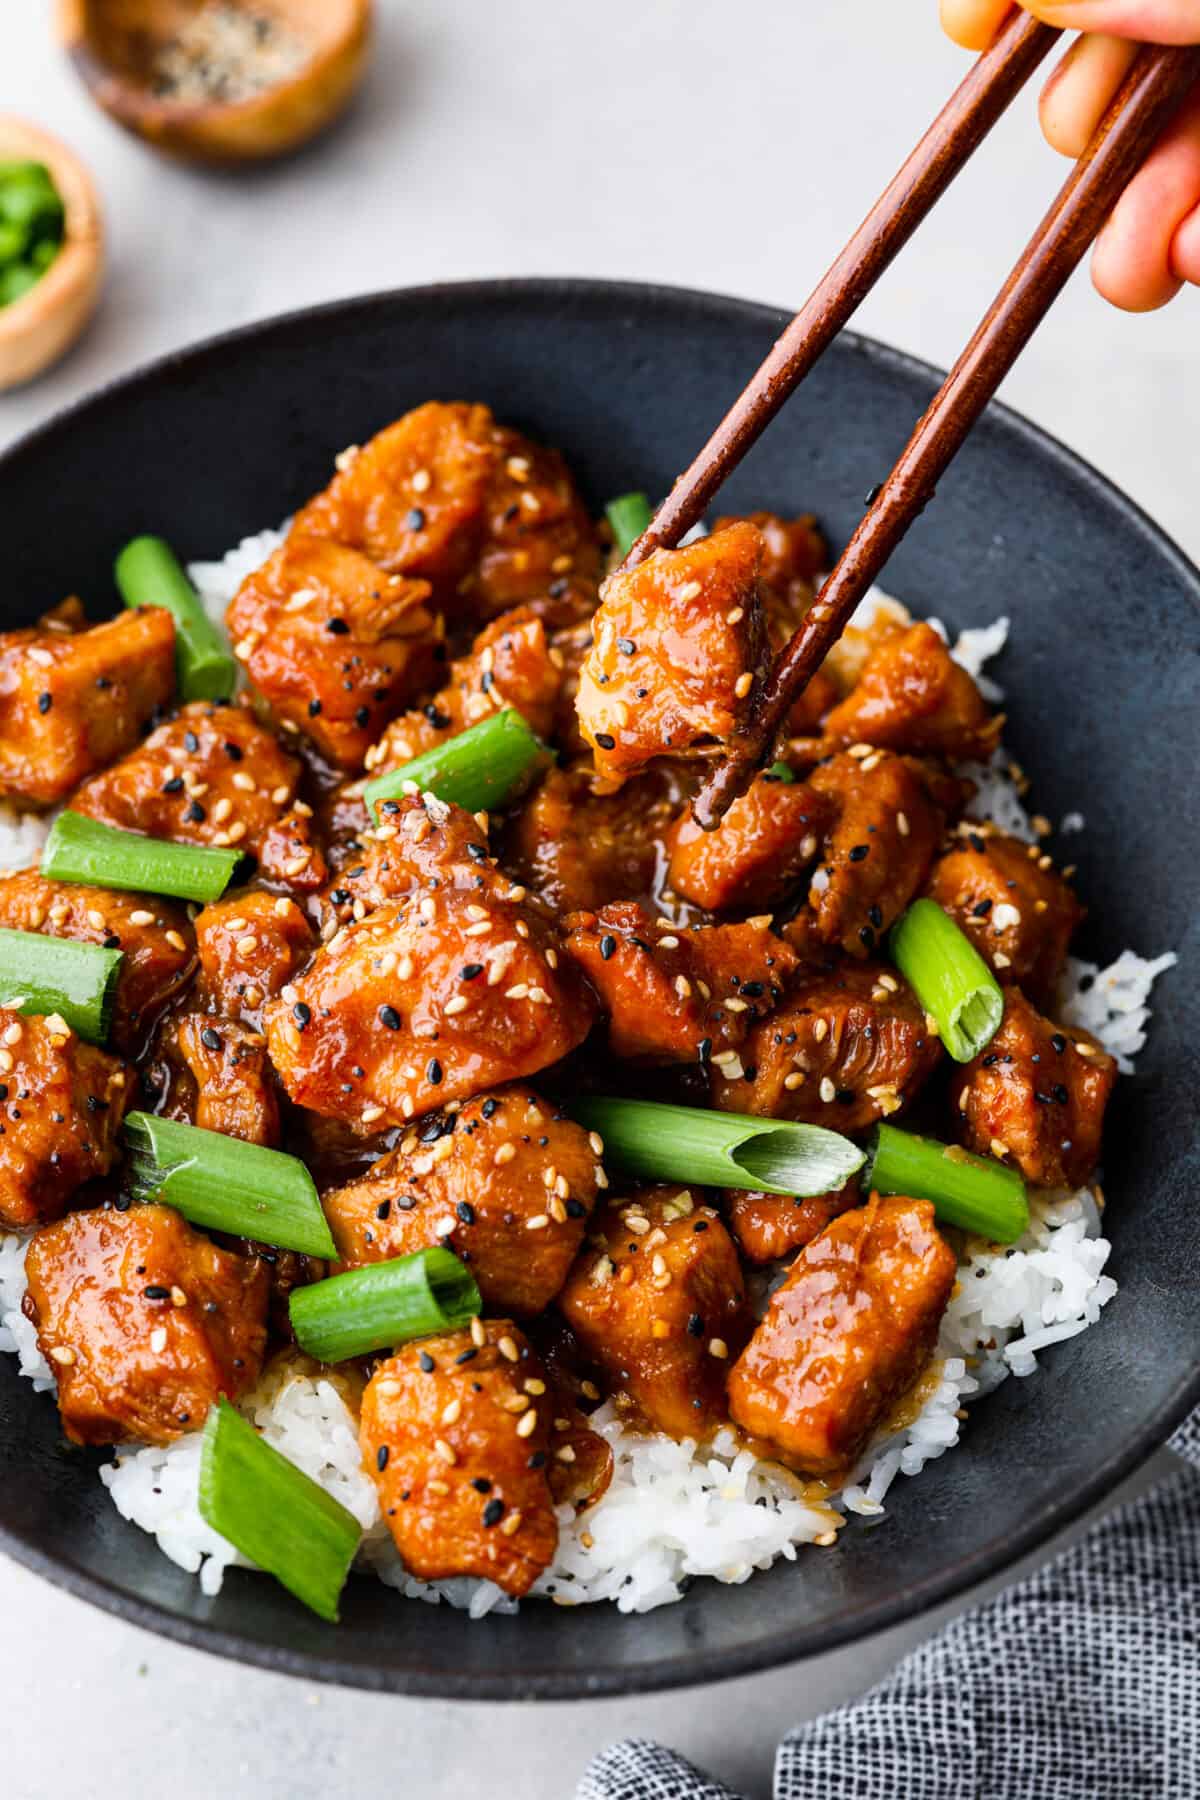 Close view of slow cooker General Tso's chicken in a black bowl served over rice. Garnished with sesame seeds and green onions. Chopsticks are picking up a piece of chicken.